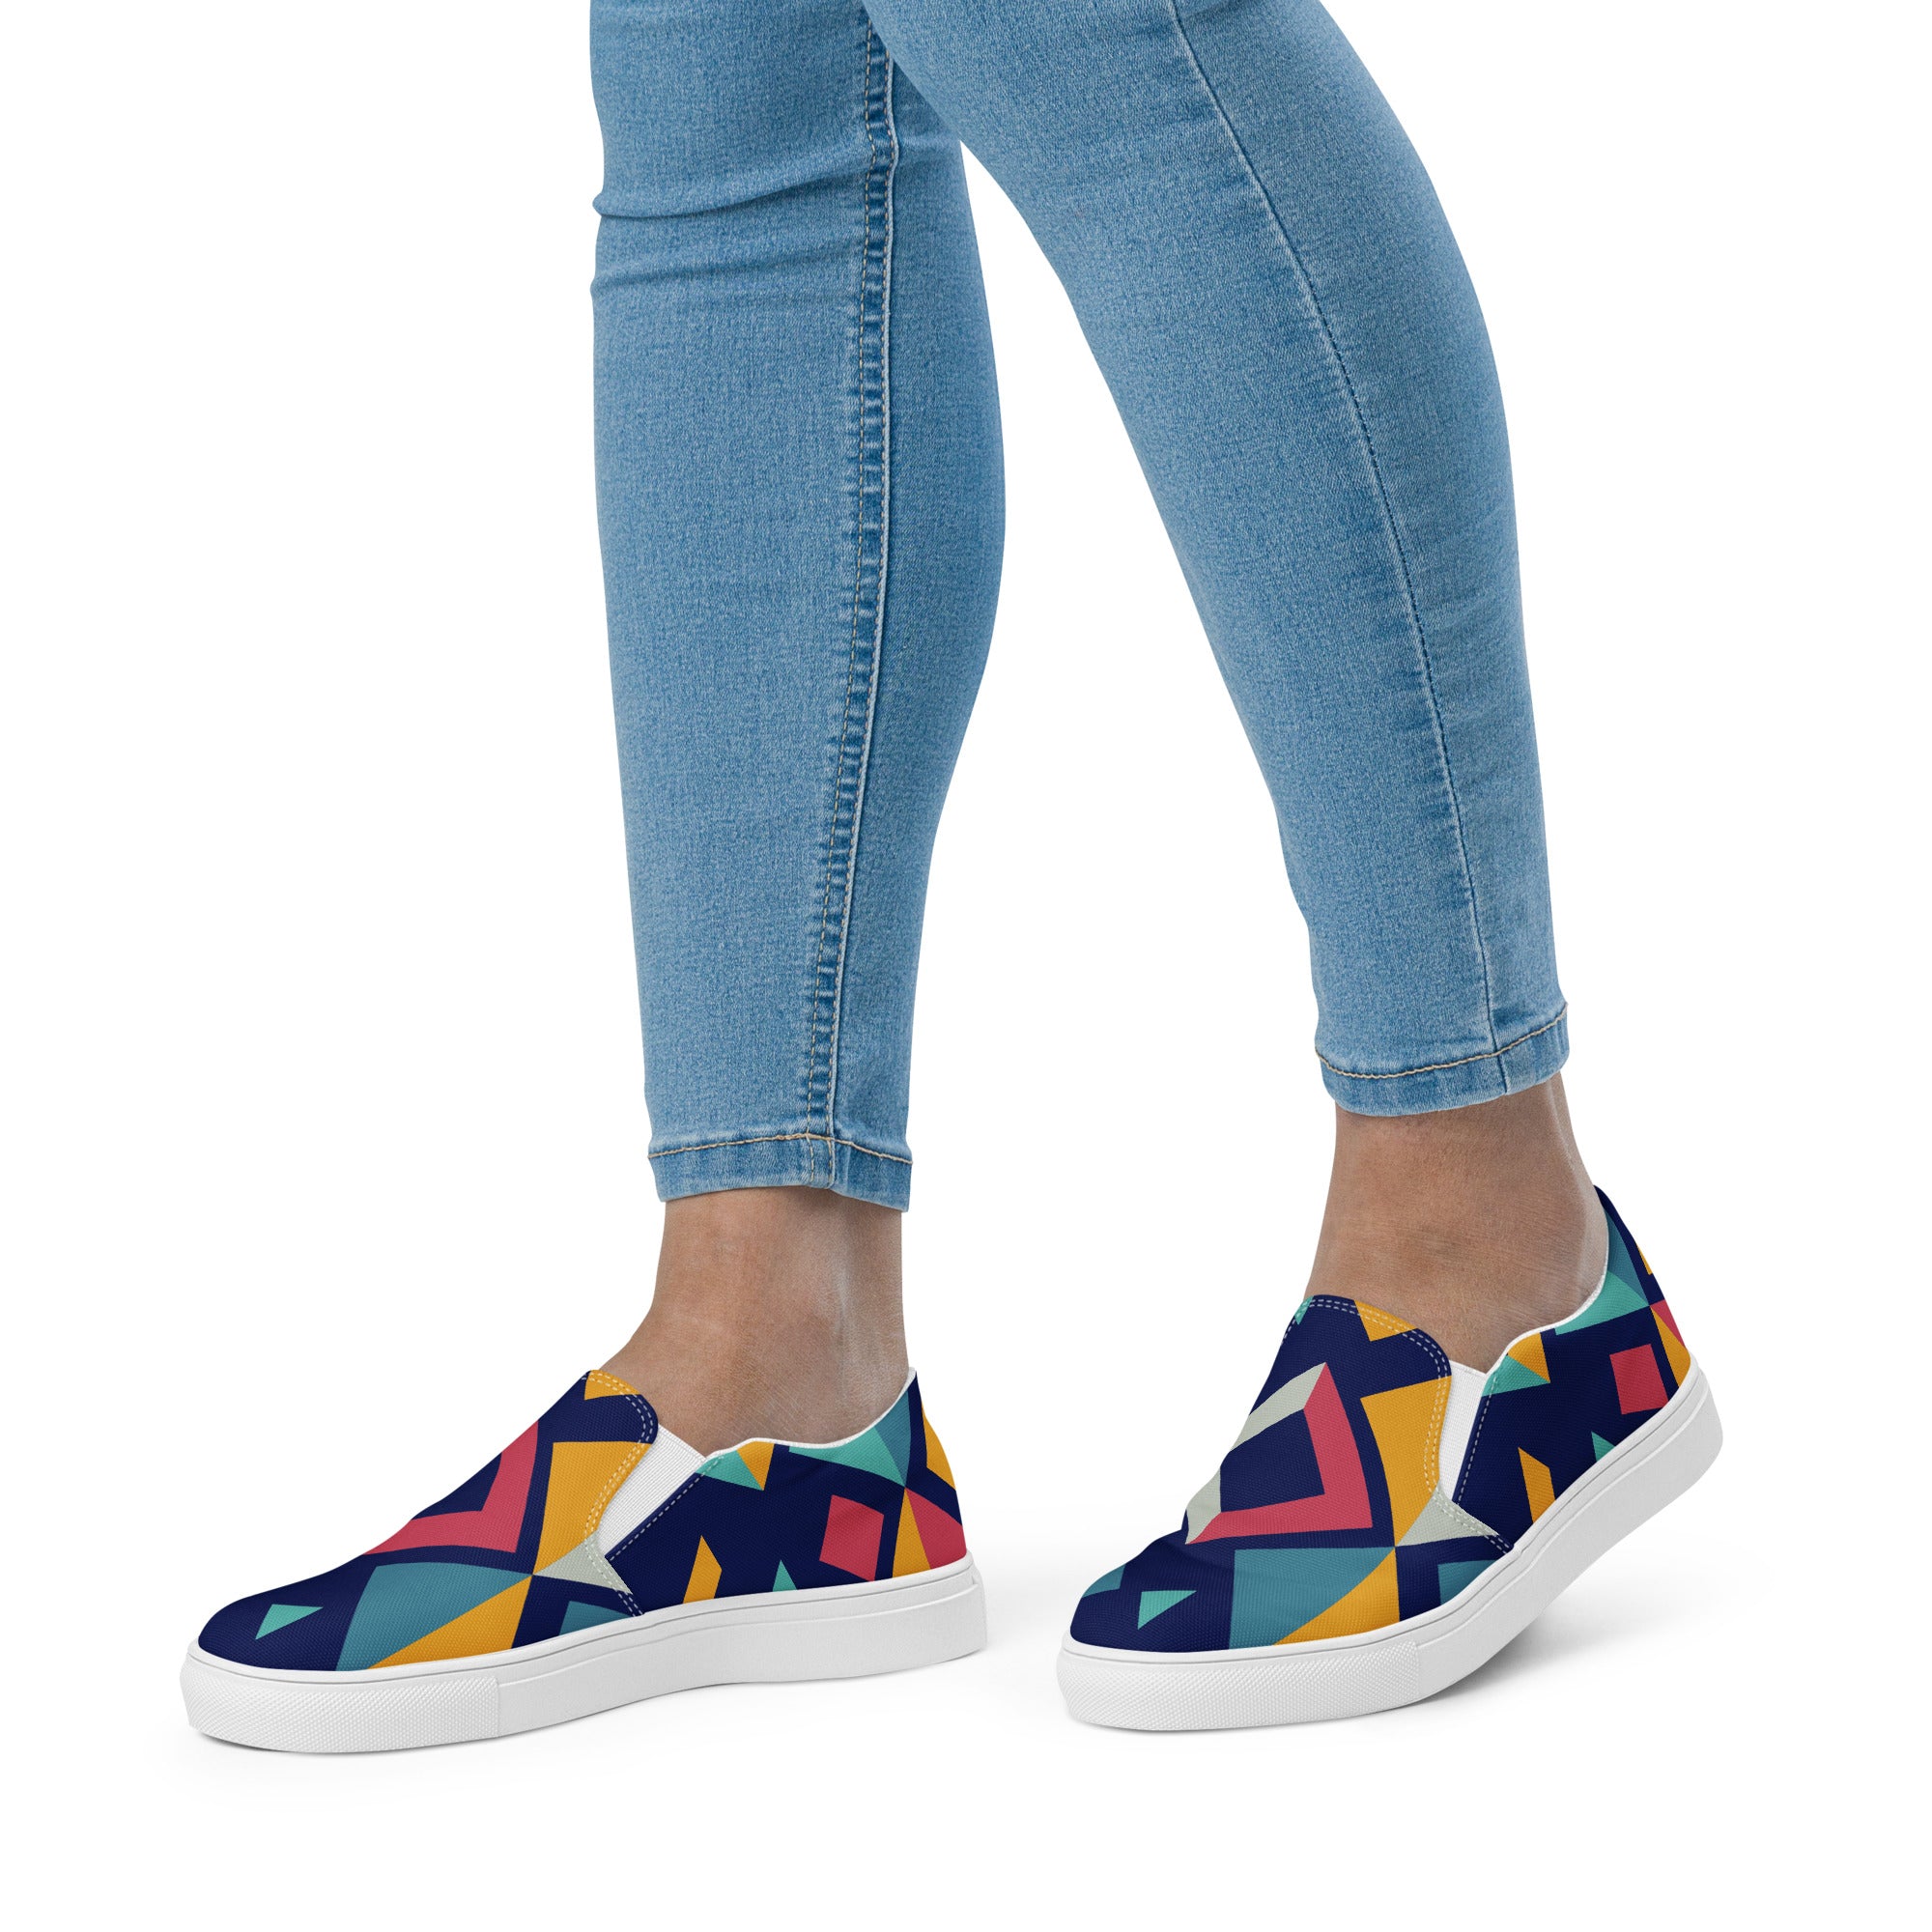 Everyday African Women’s slip-on canvas shoes